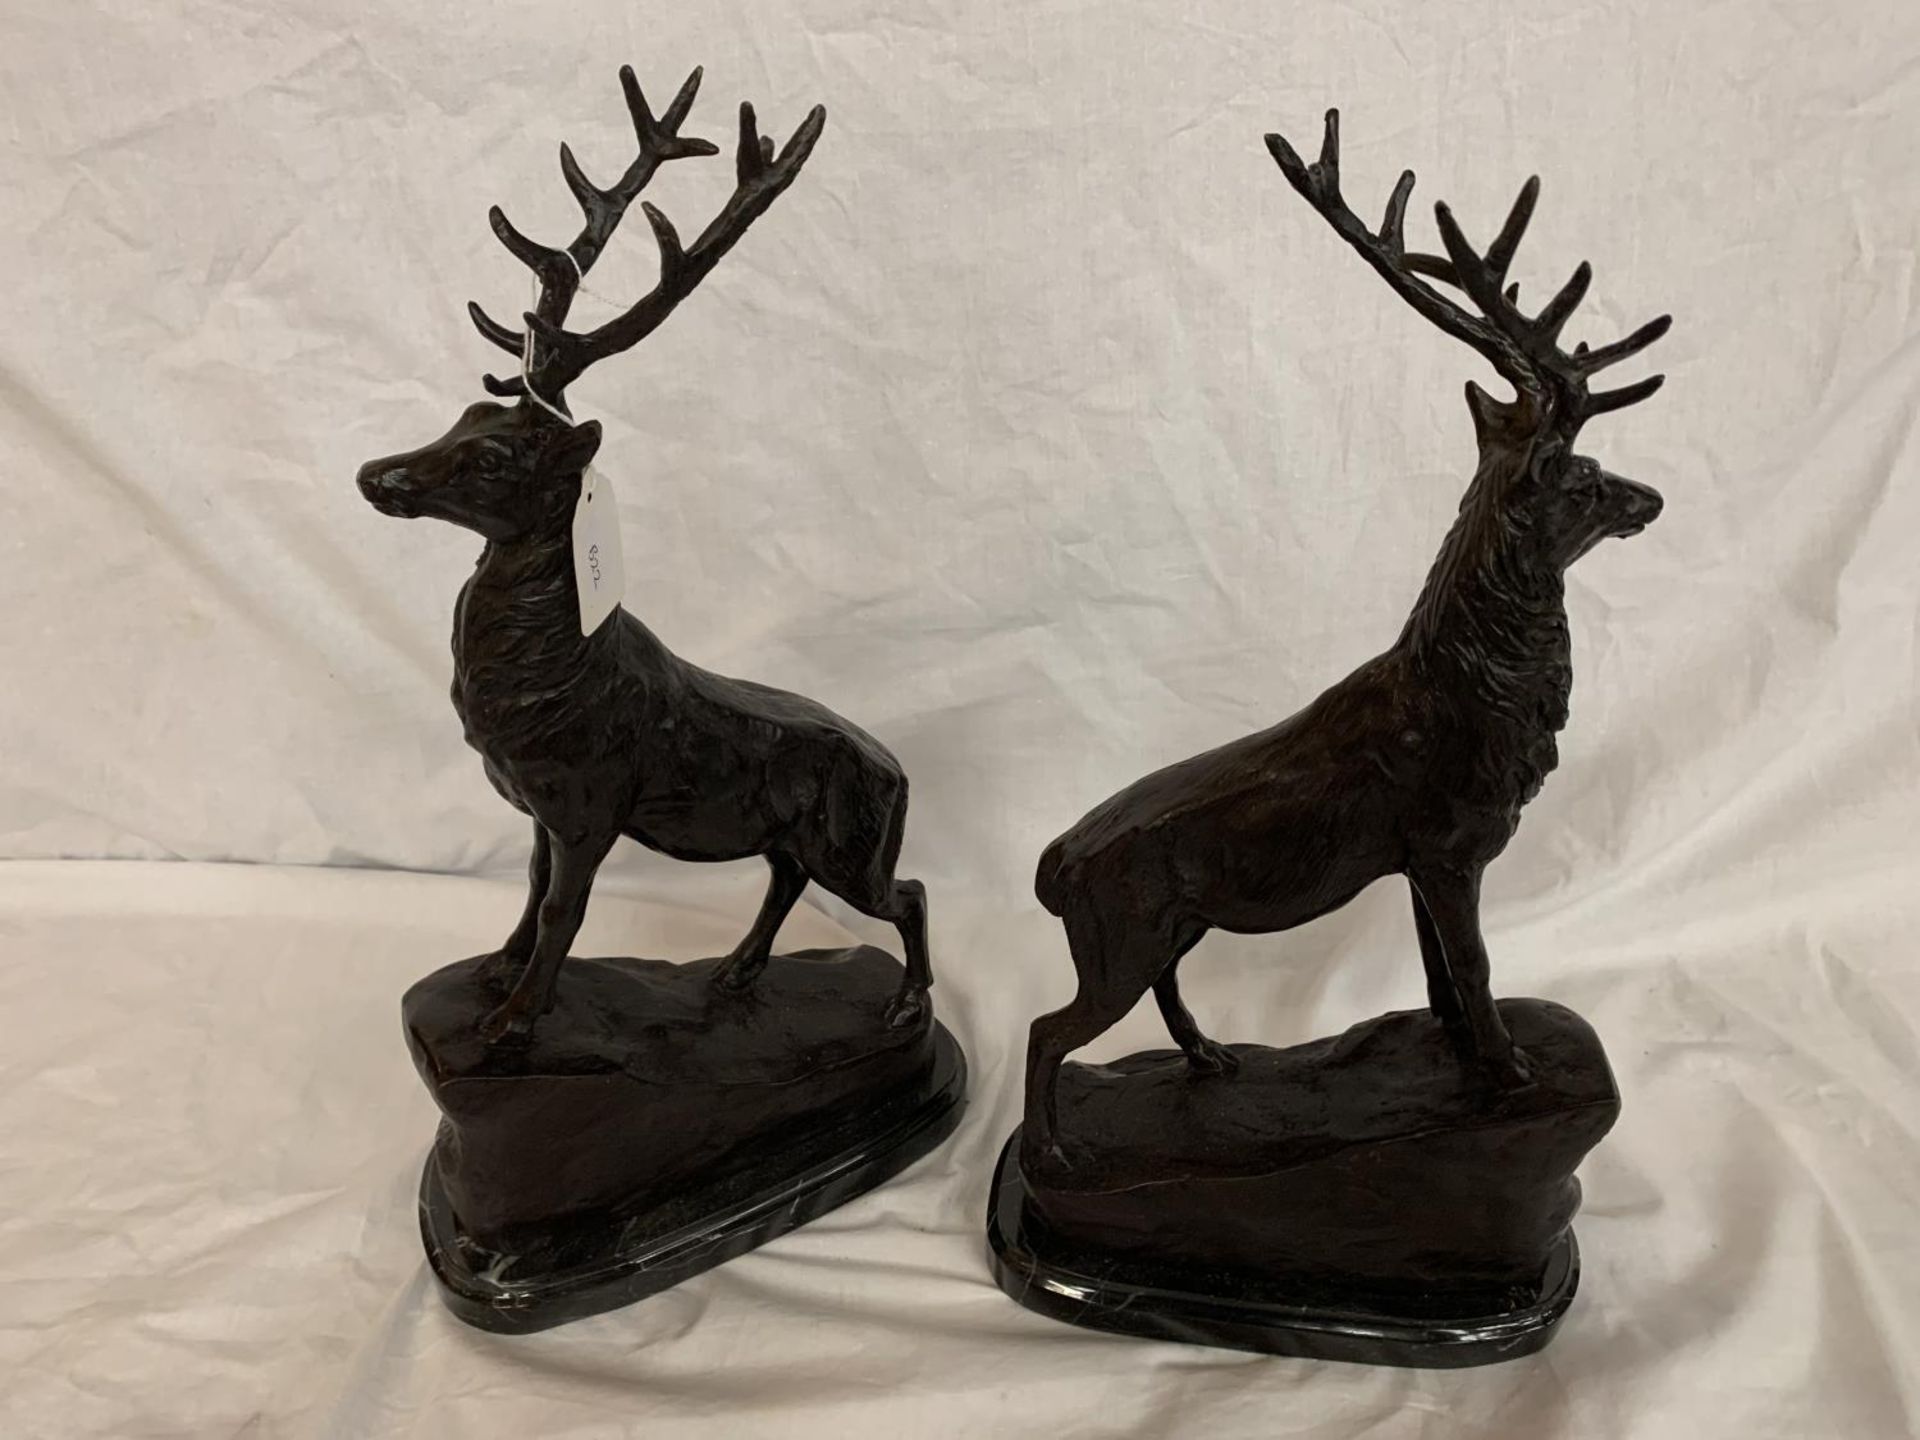 A PAIR OF IMPRESSIVE BRONZE STAGS ON MARBLE BASES - Image 4 of 4